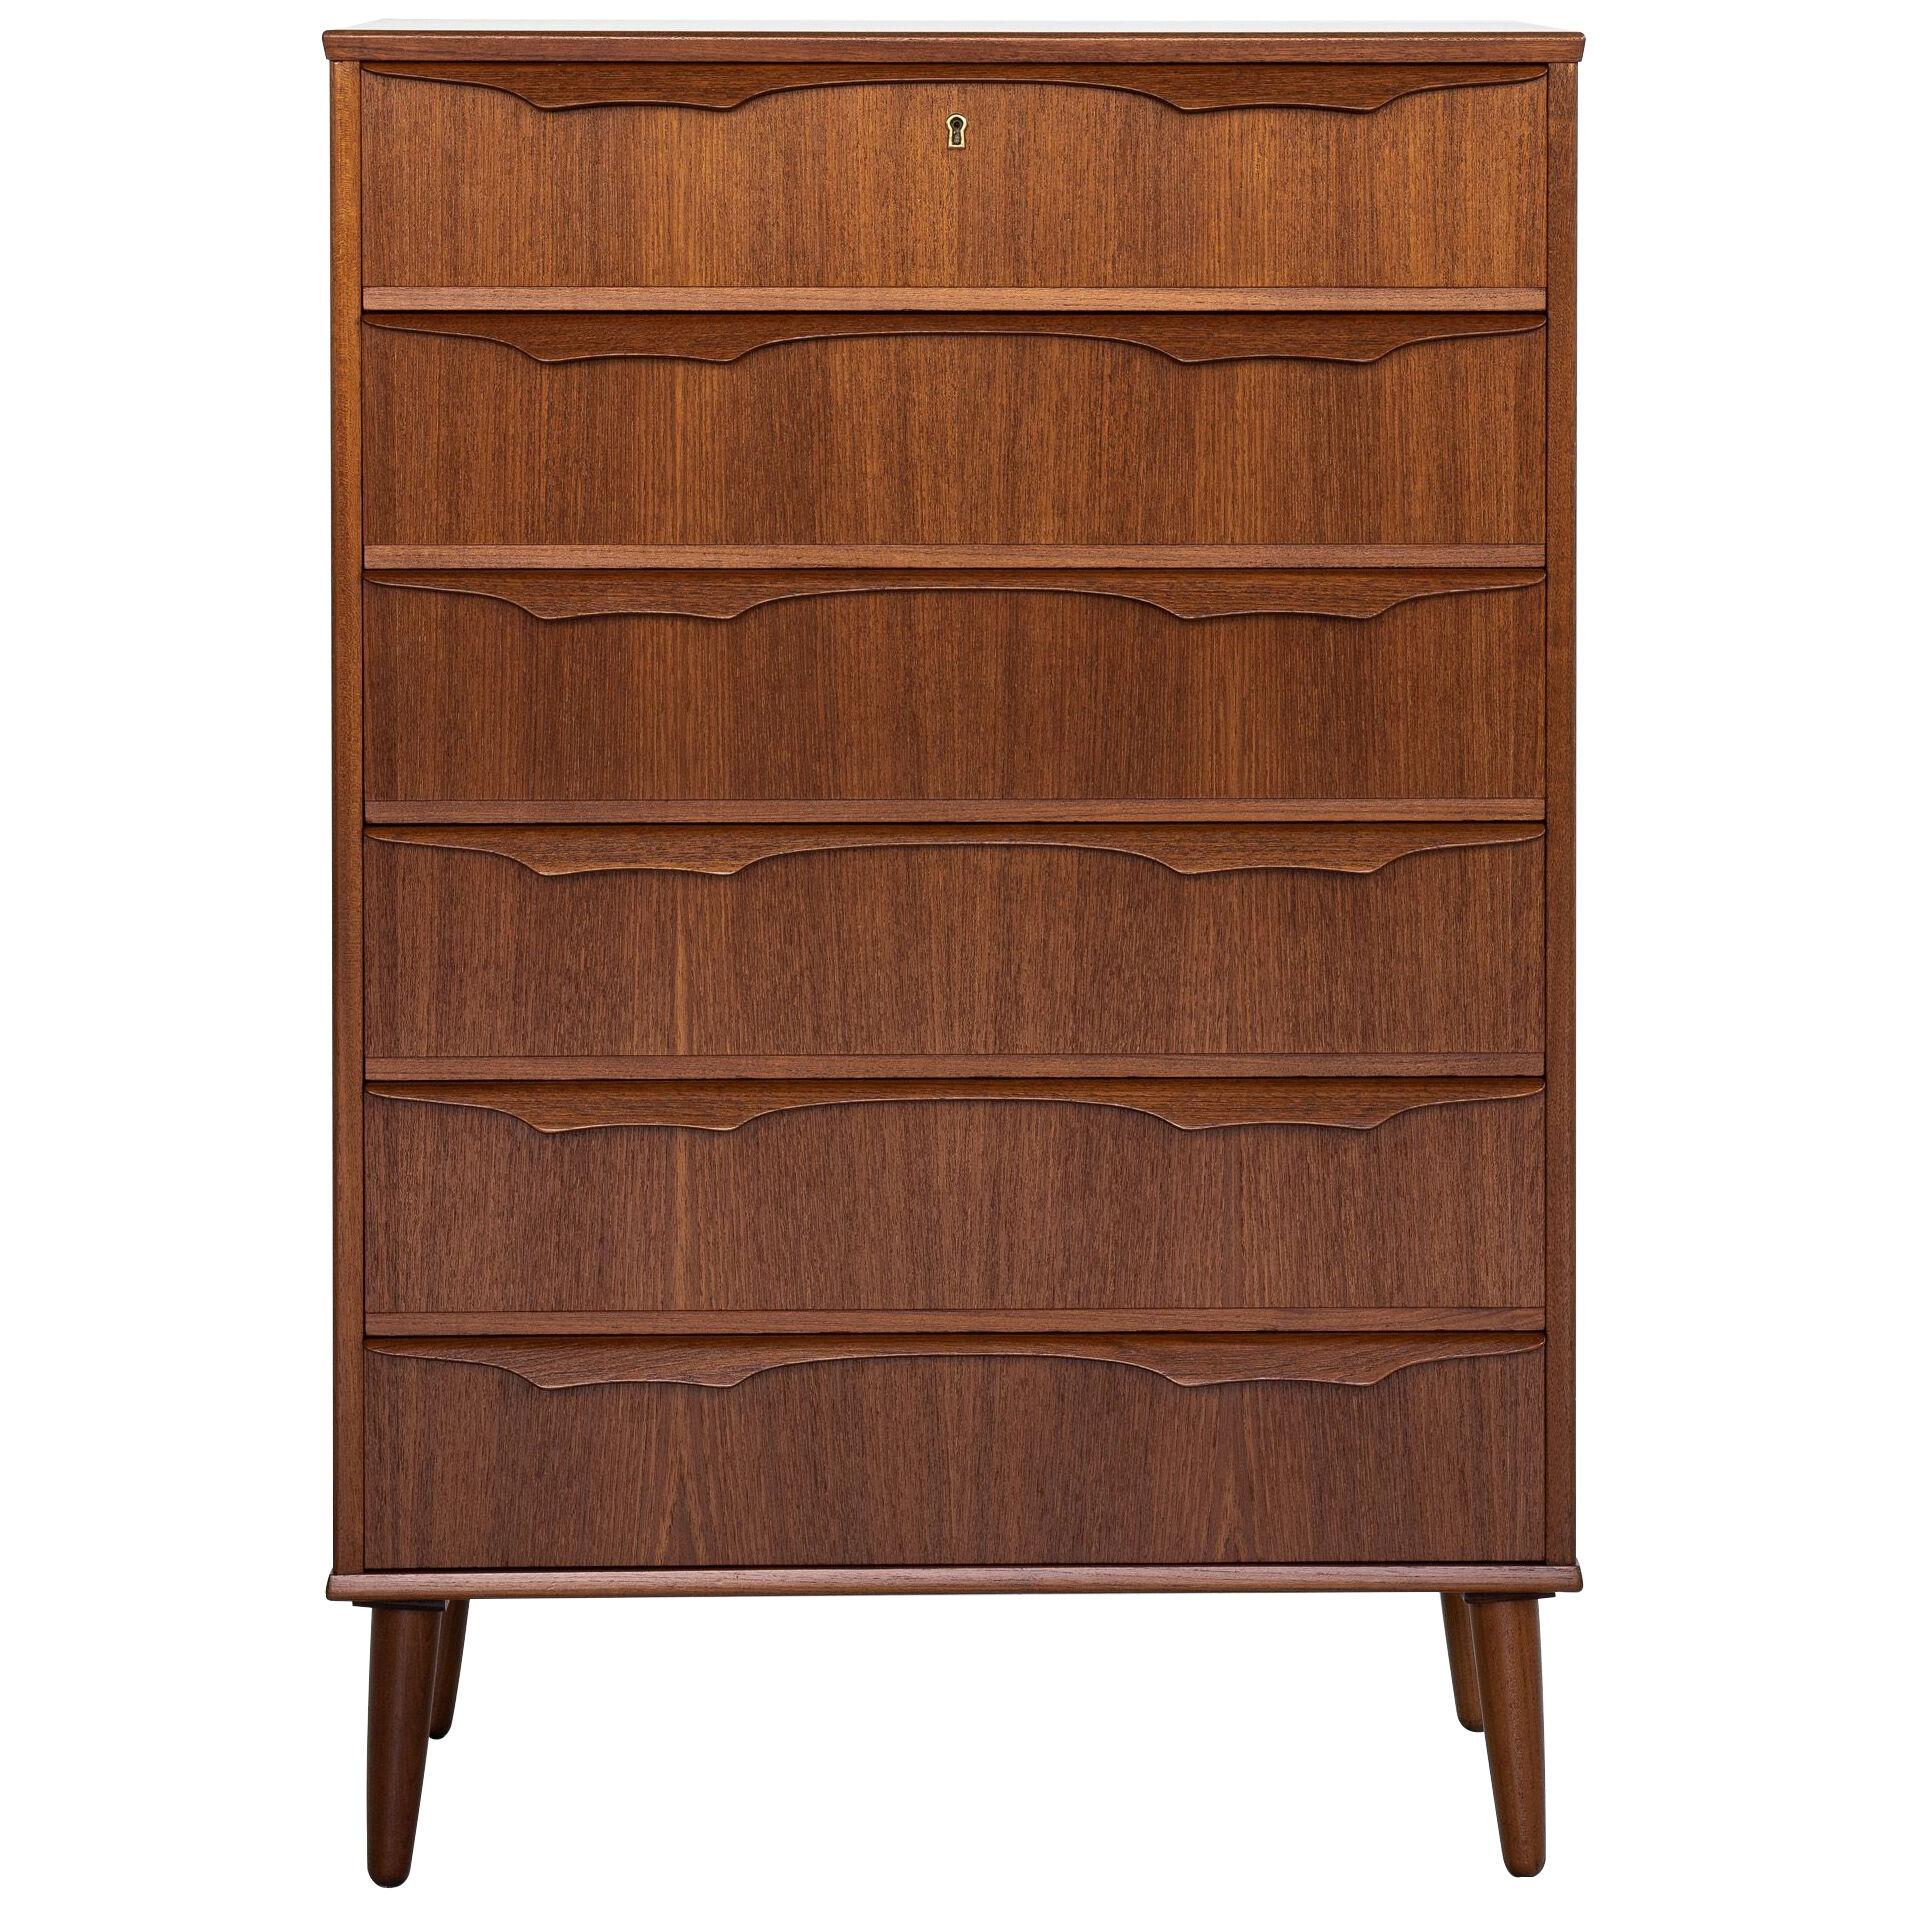 Midcentury Danish chest of 6 drawers by Klaus Okholm for Trekanten 1960s